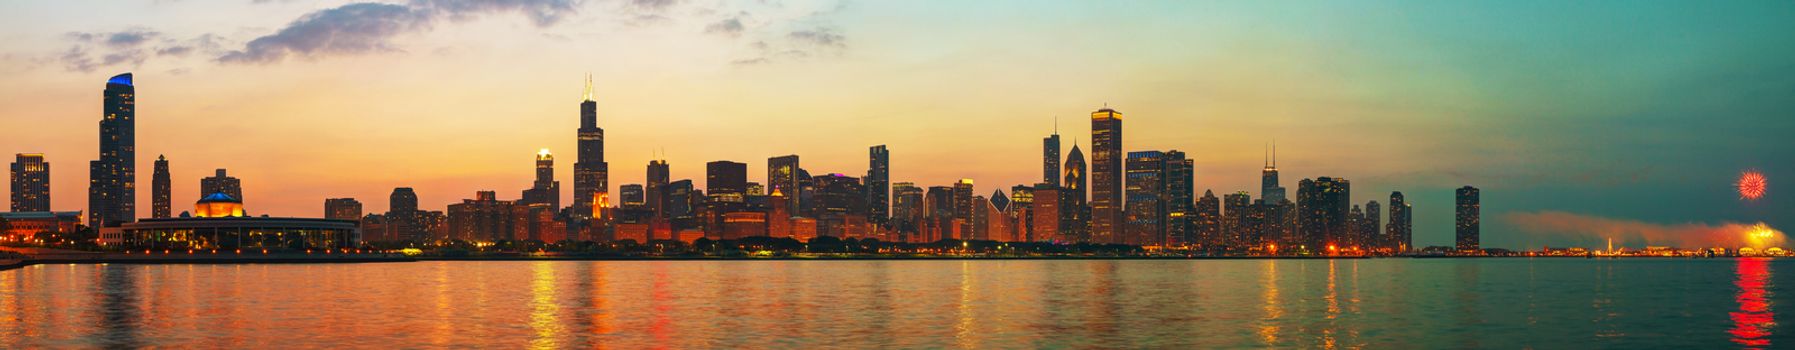 Downtown Chicago, IL at sunset as seen from Lake Michigan